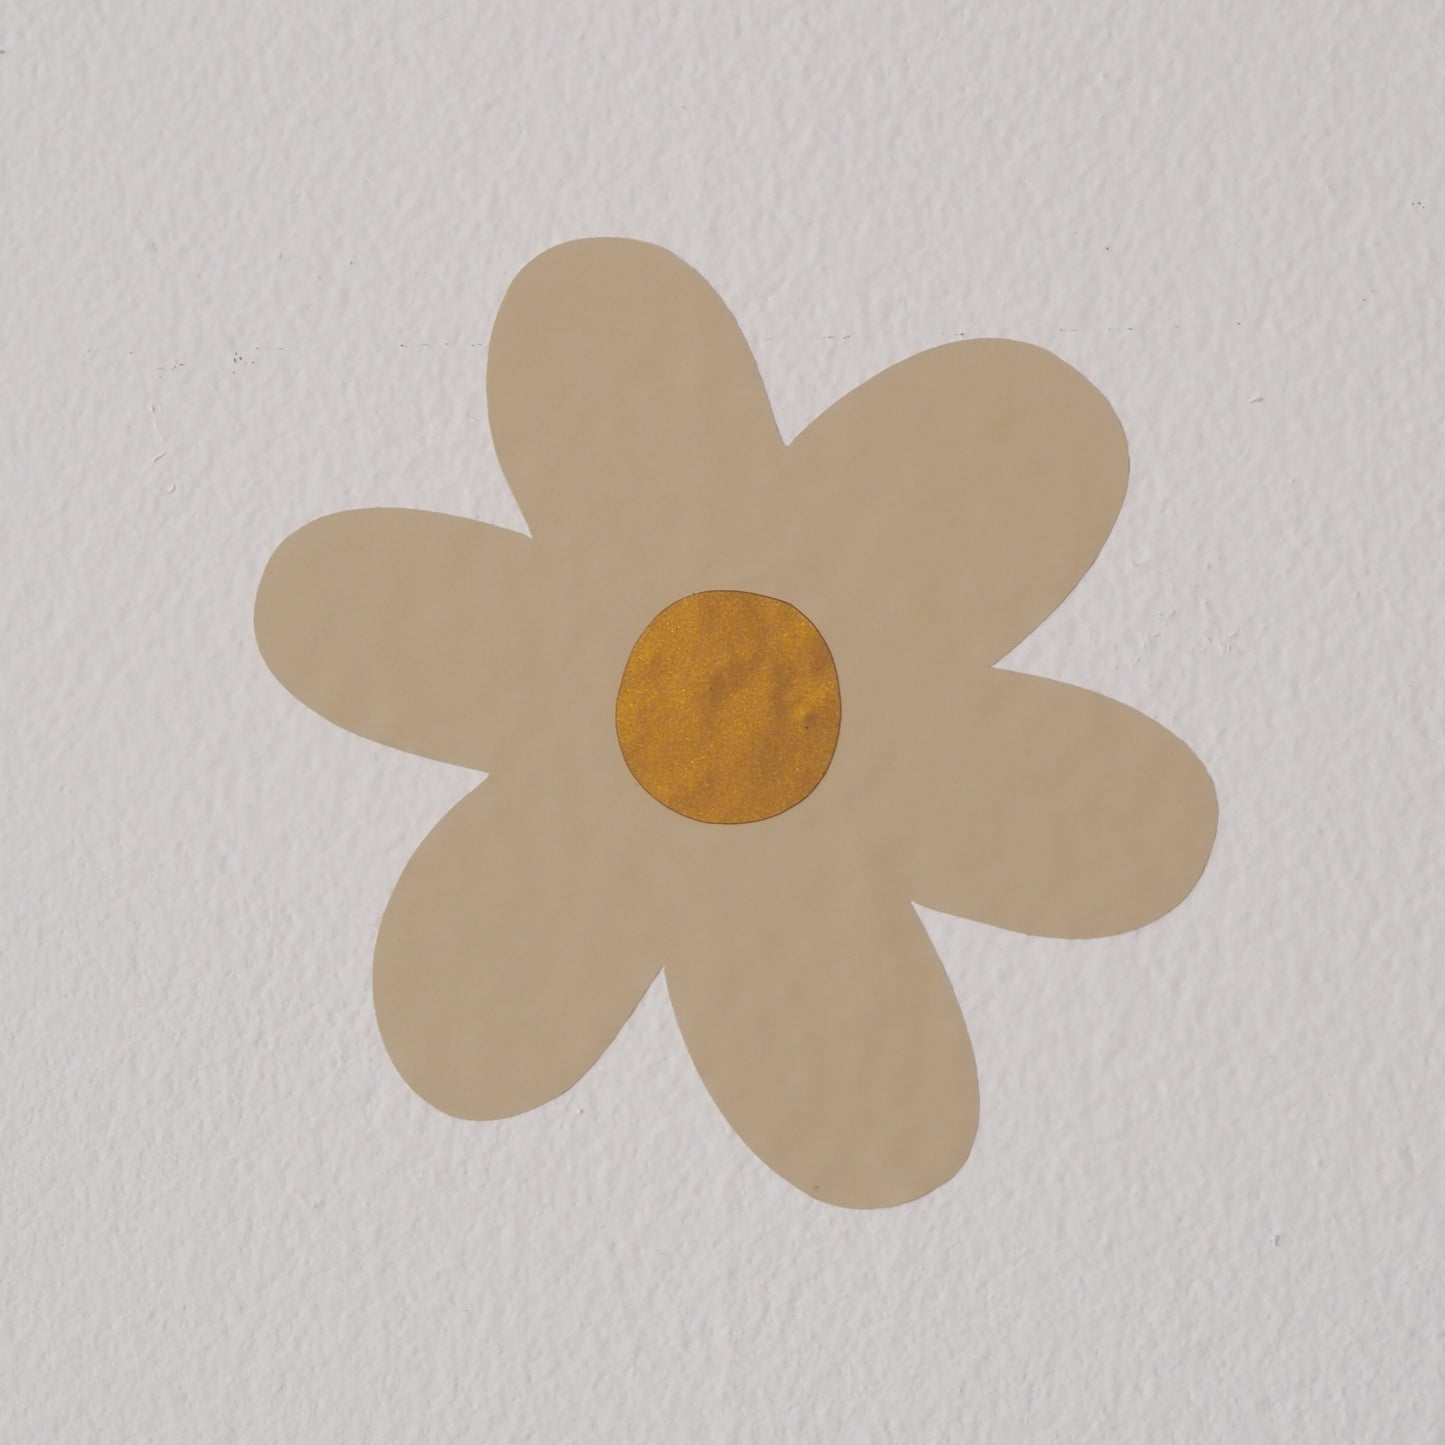 Daisy Sticker Pack min 7 daisies per pack - more colours available Sample Sale